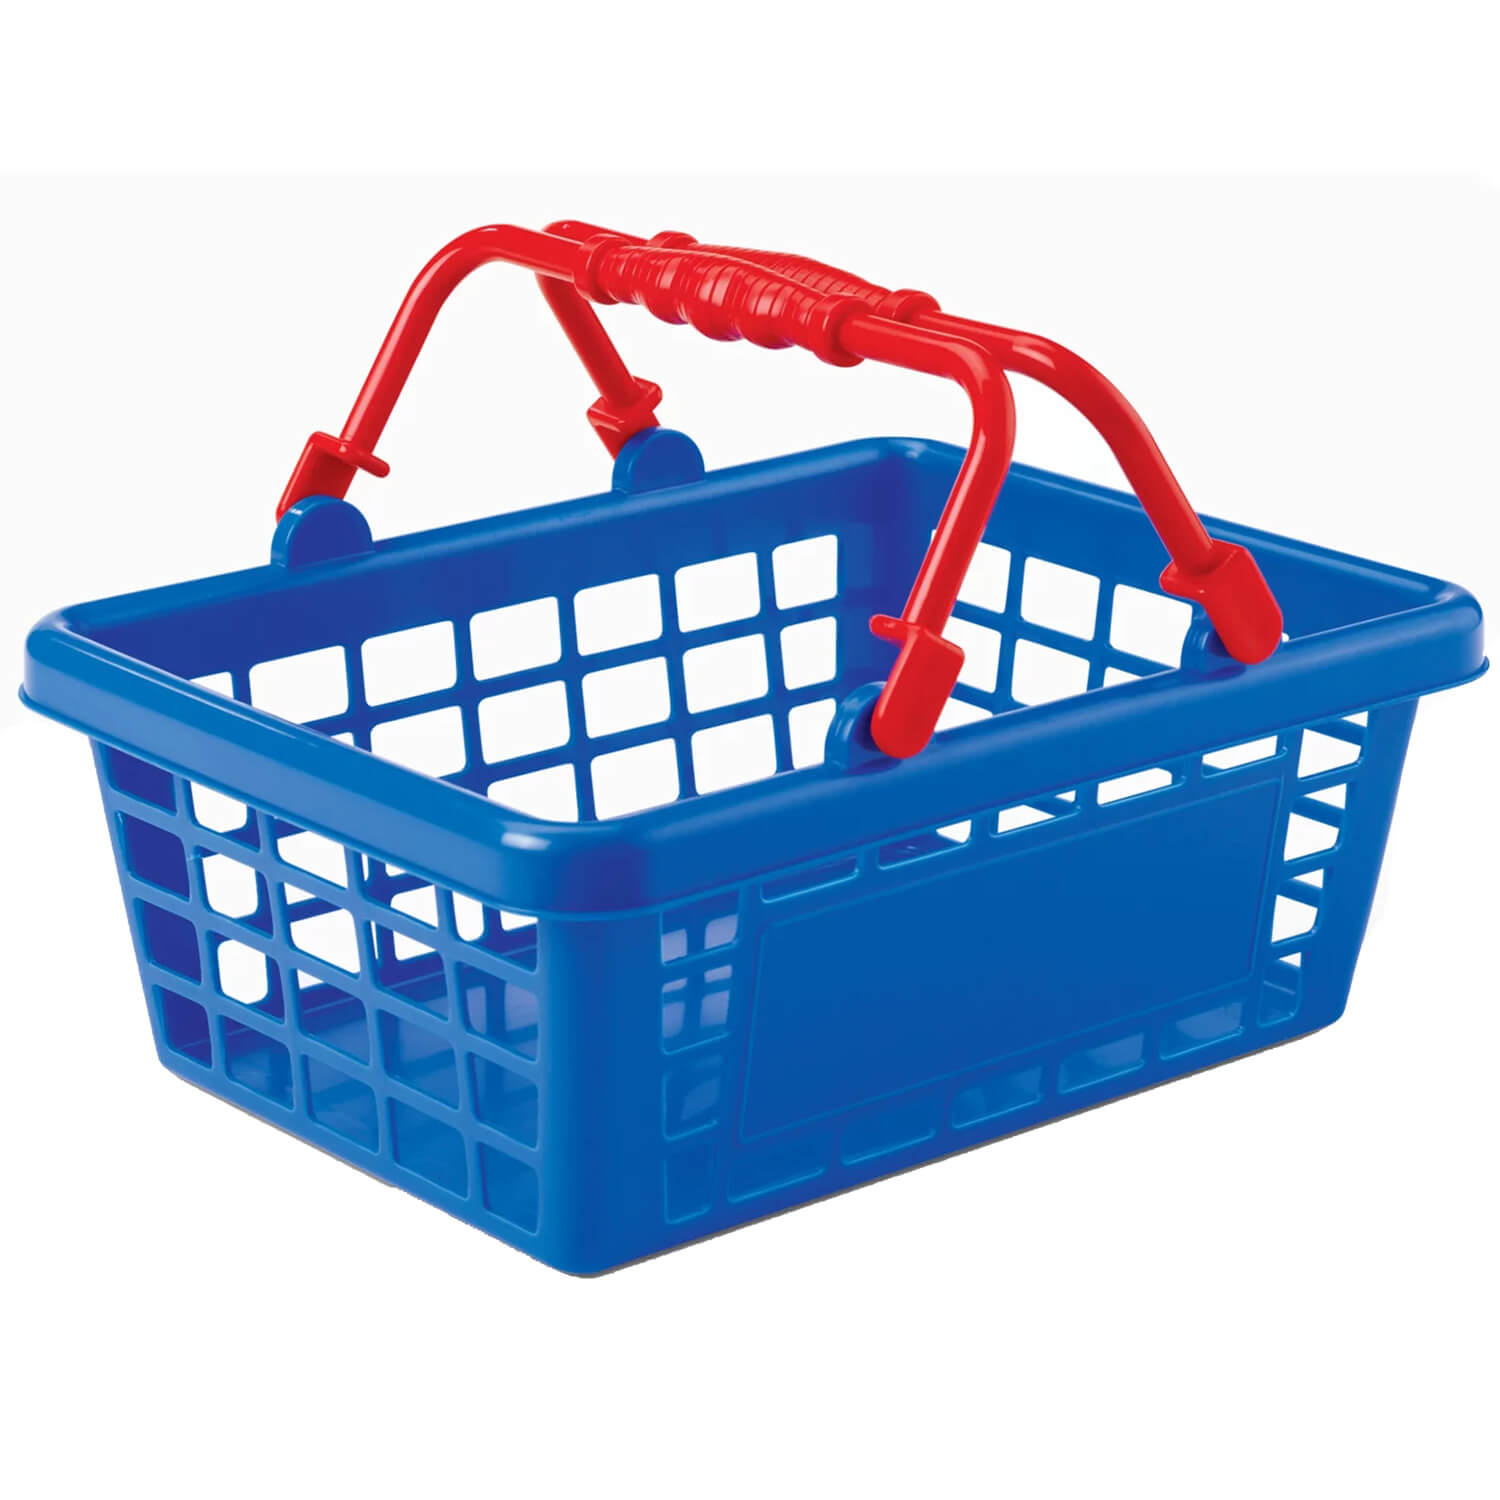 W17959919 Let’s Go Shopping Grocery Baskets